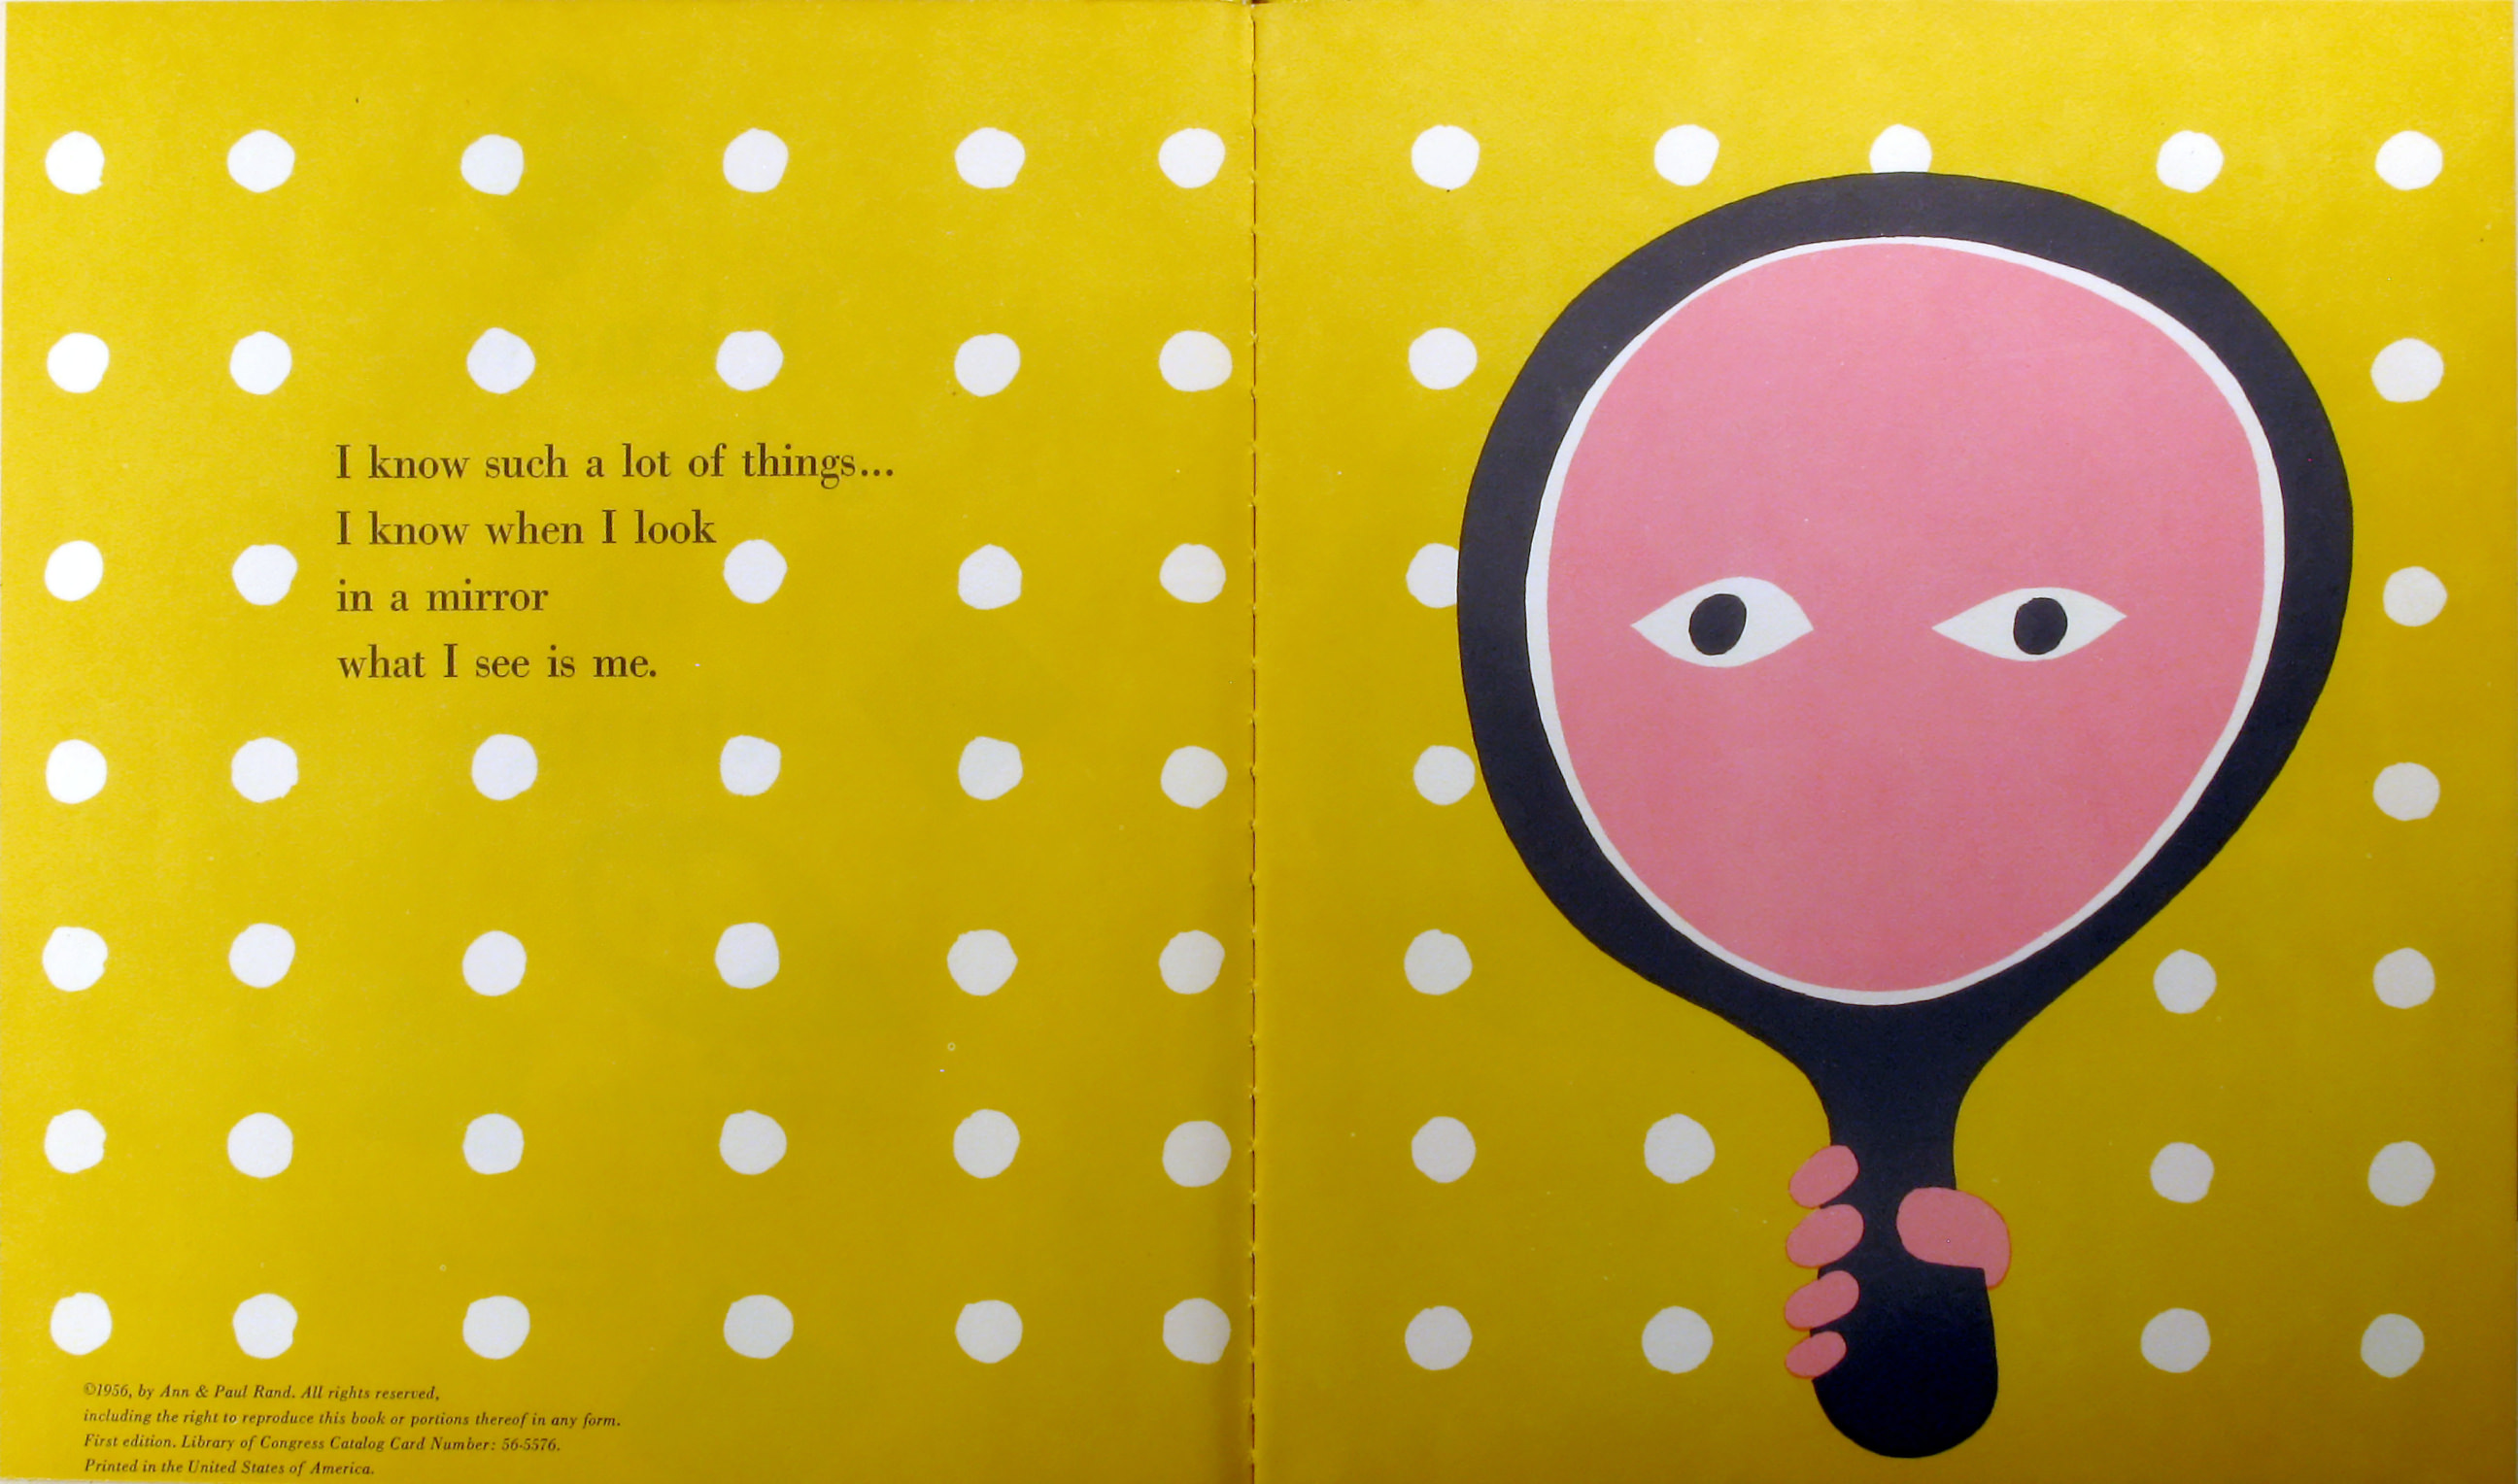 I Know a Lot of Things | Paul Rand: Modernist Master 1914-1996